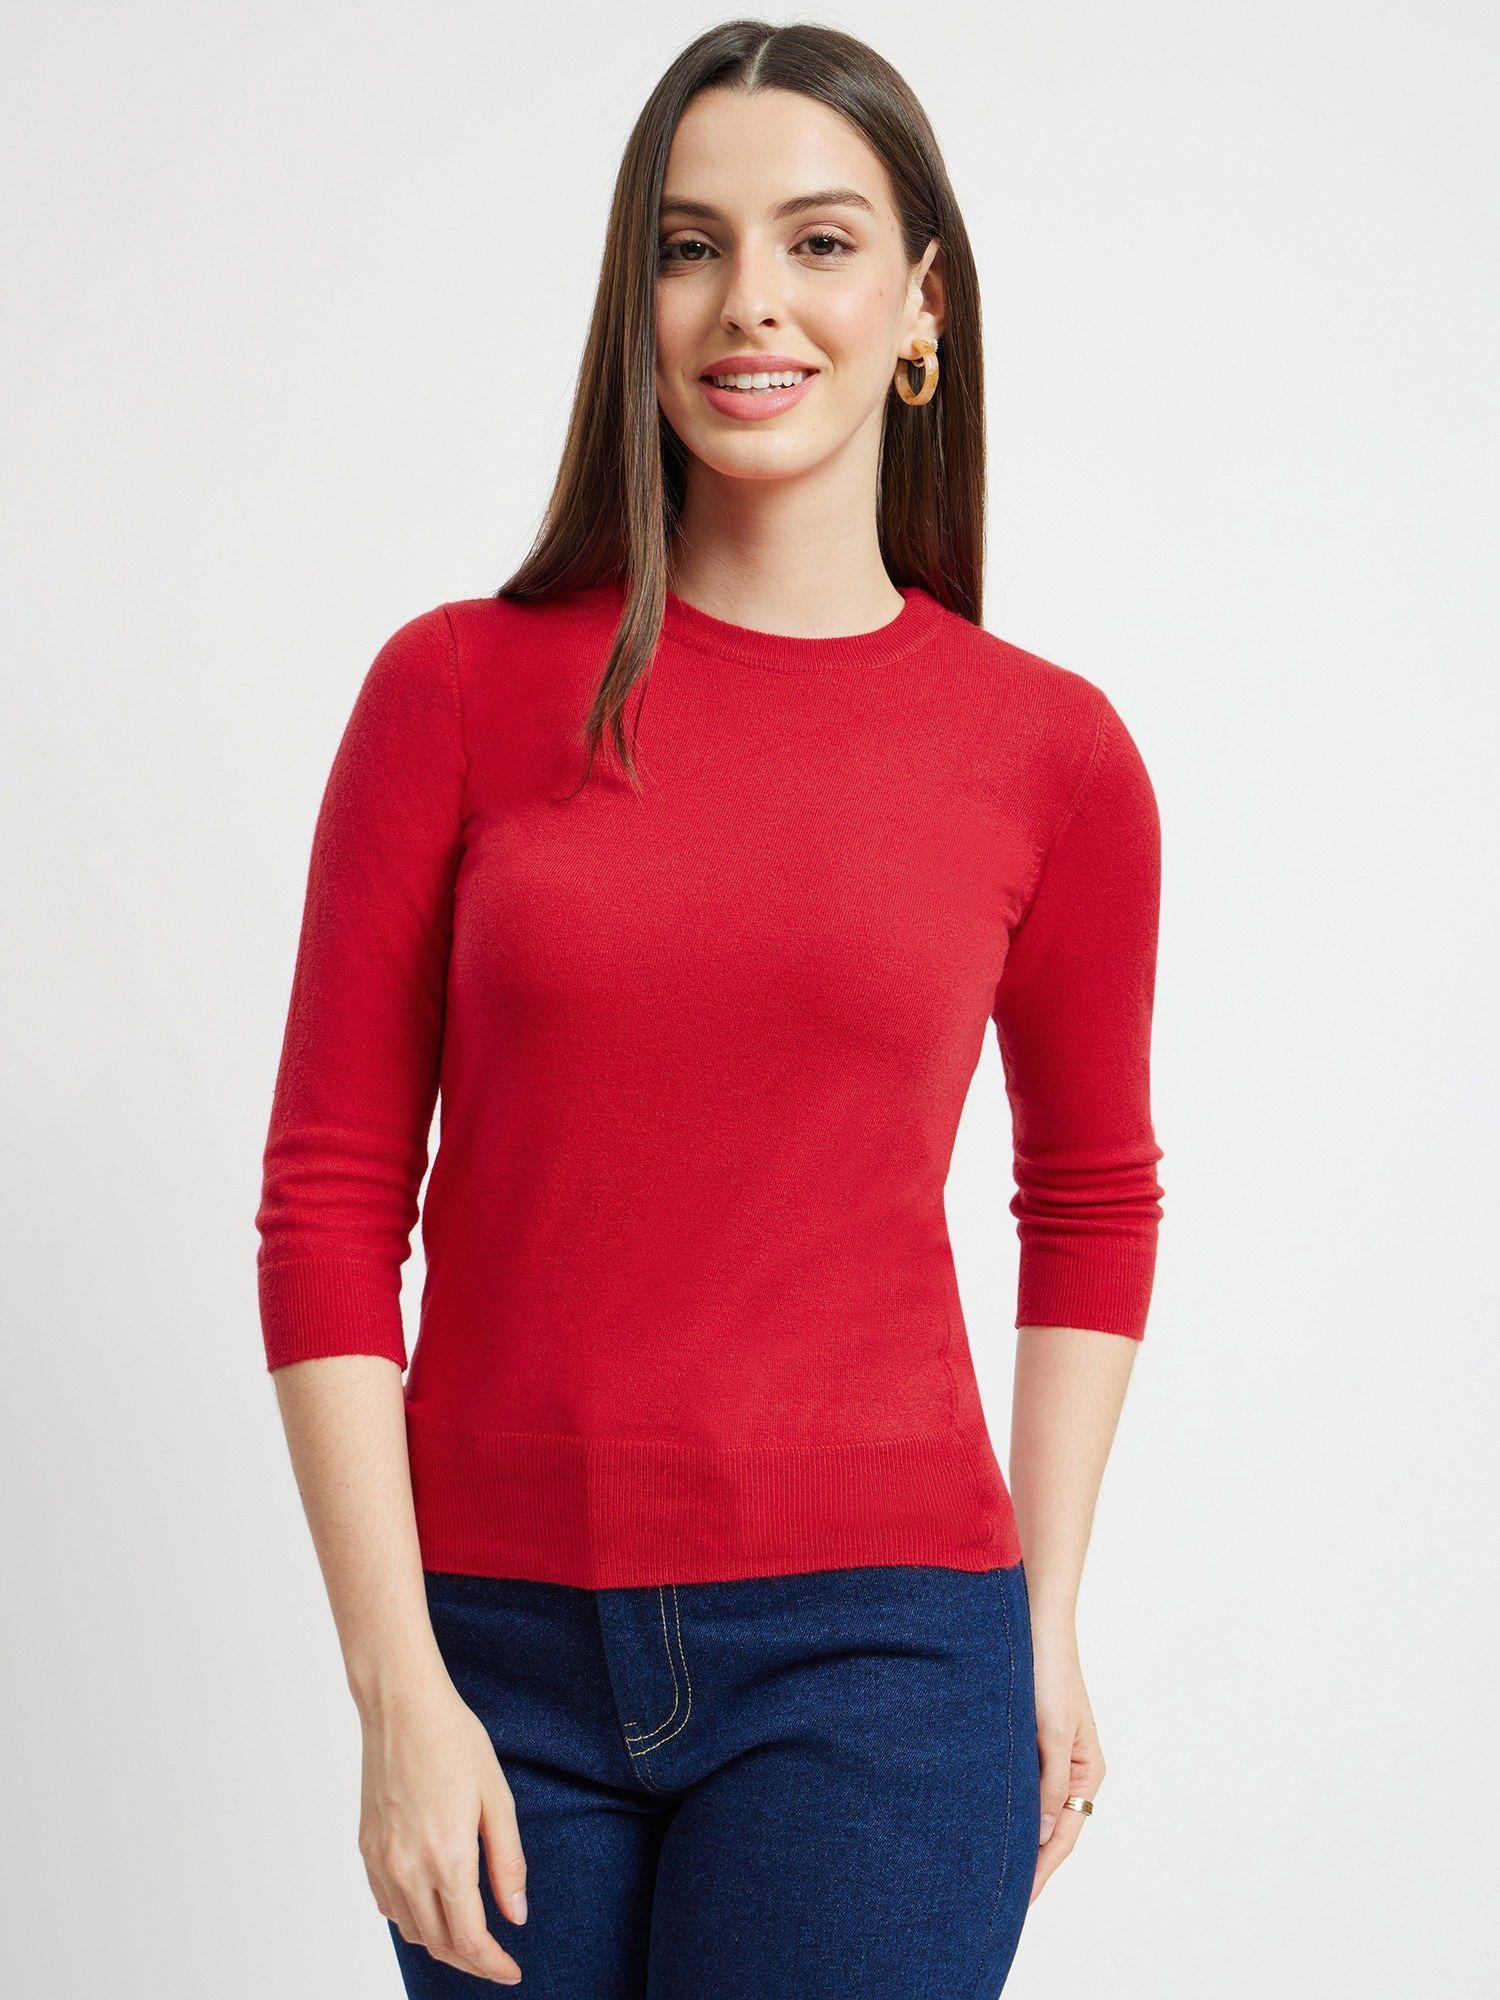 livsoft round neck knitted sweater - red